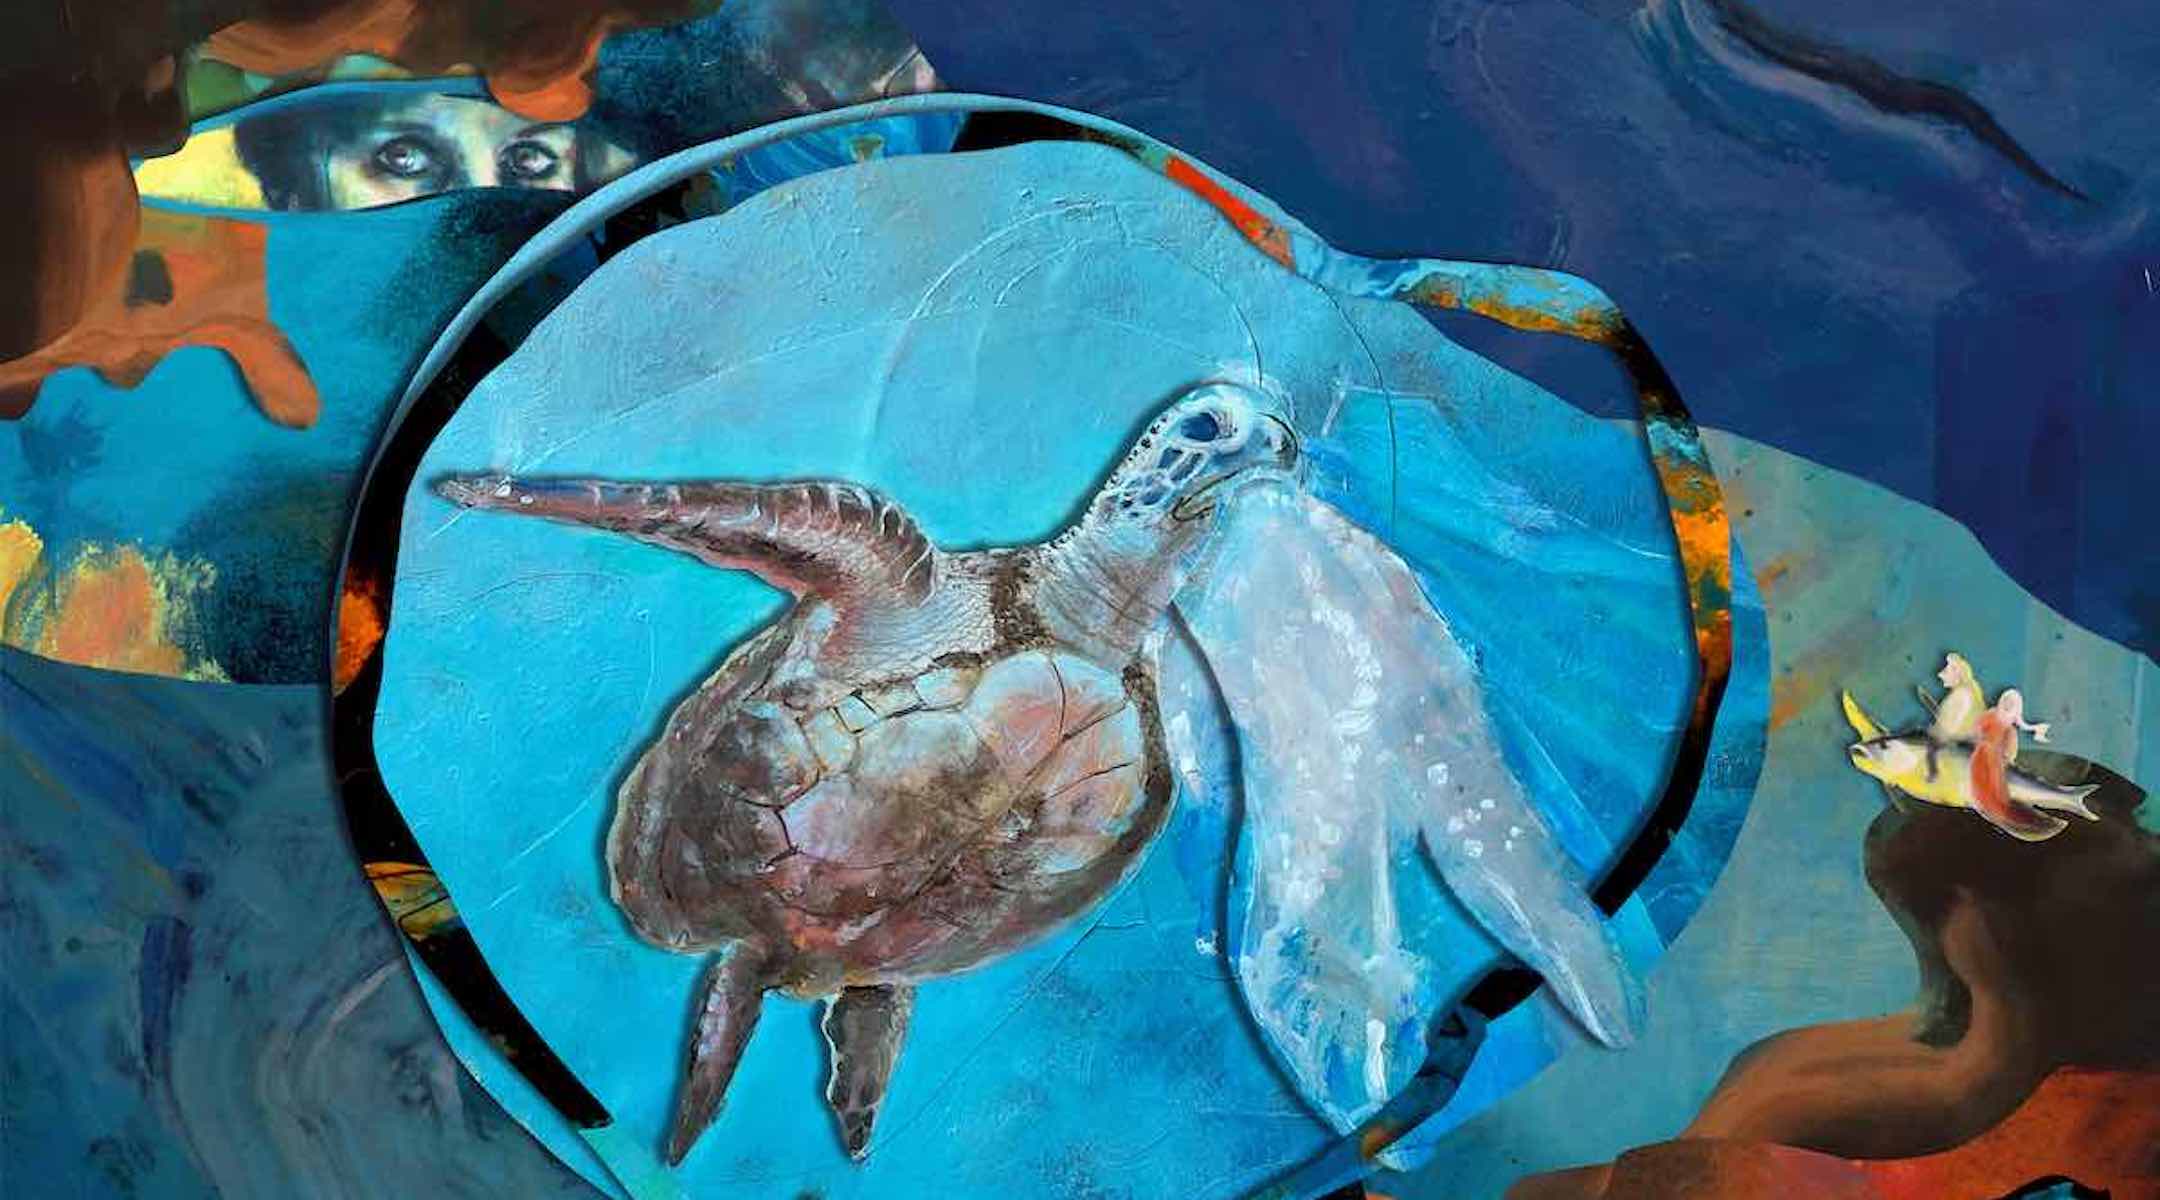 “Living Waters: Turtle eating Plastic.” Acrylic on canvas by artist Yona Verwer. This painting will be featured as part of “Activate,” at the Heller Museum in New York, which is partnering with the Jerusalem Biennale to host satellite exhibits while war wages in Israel. (Yona Verwer)